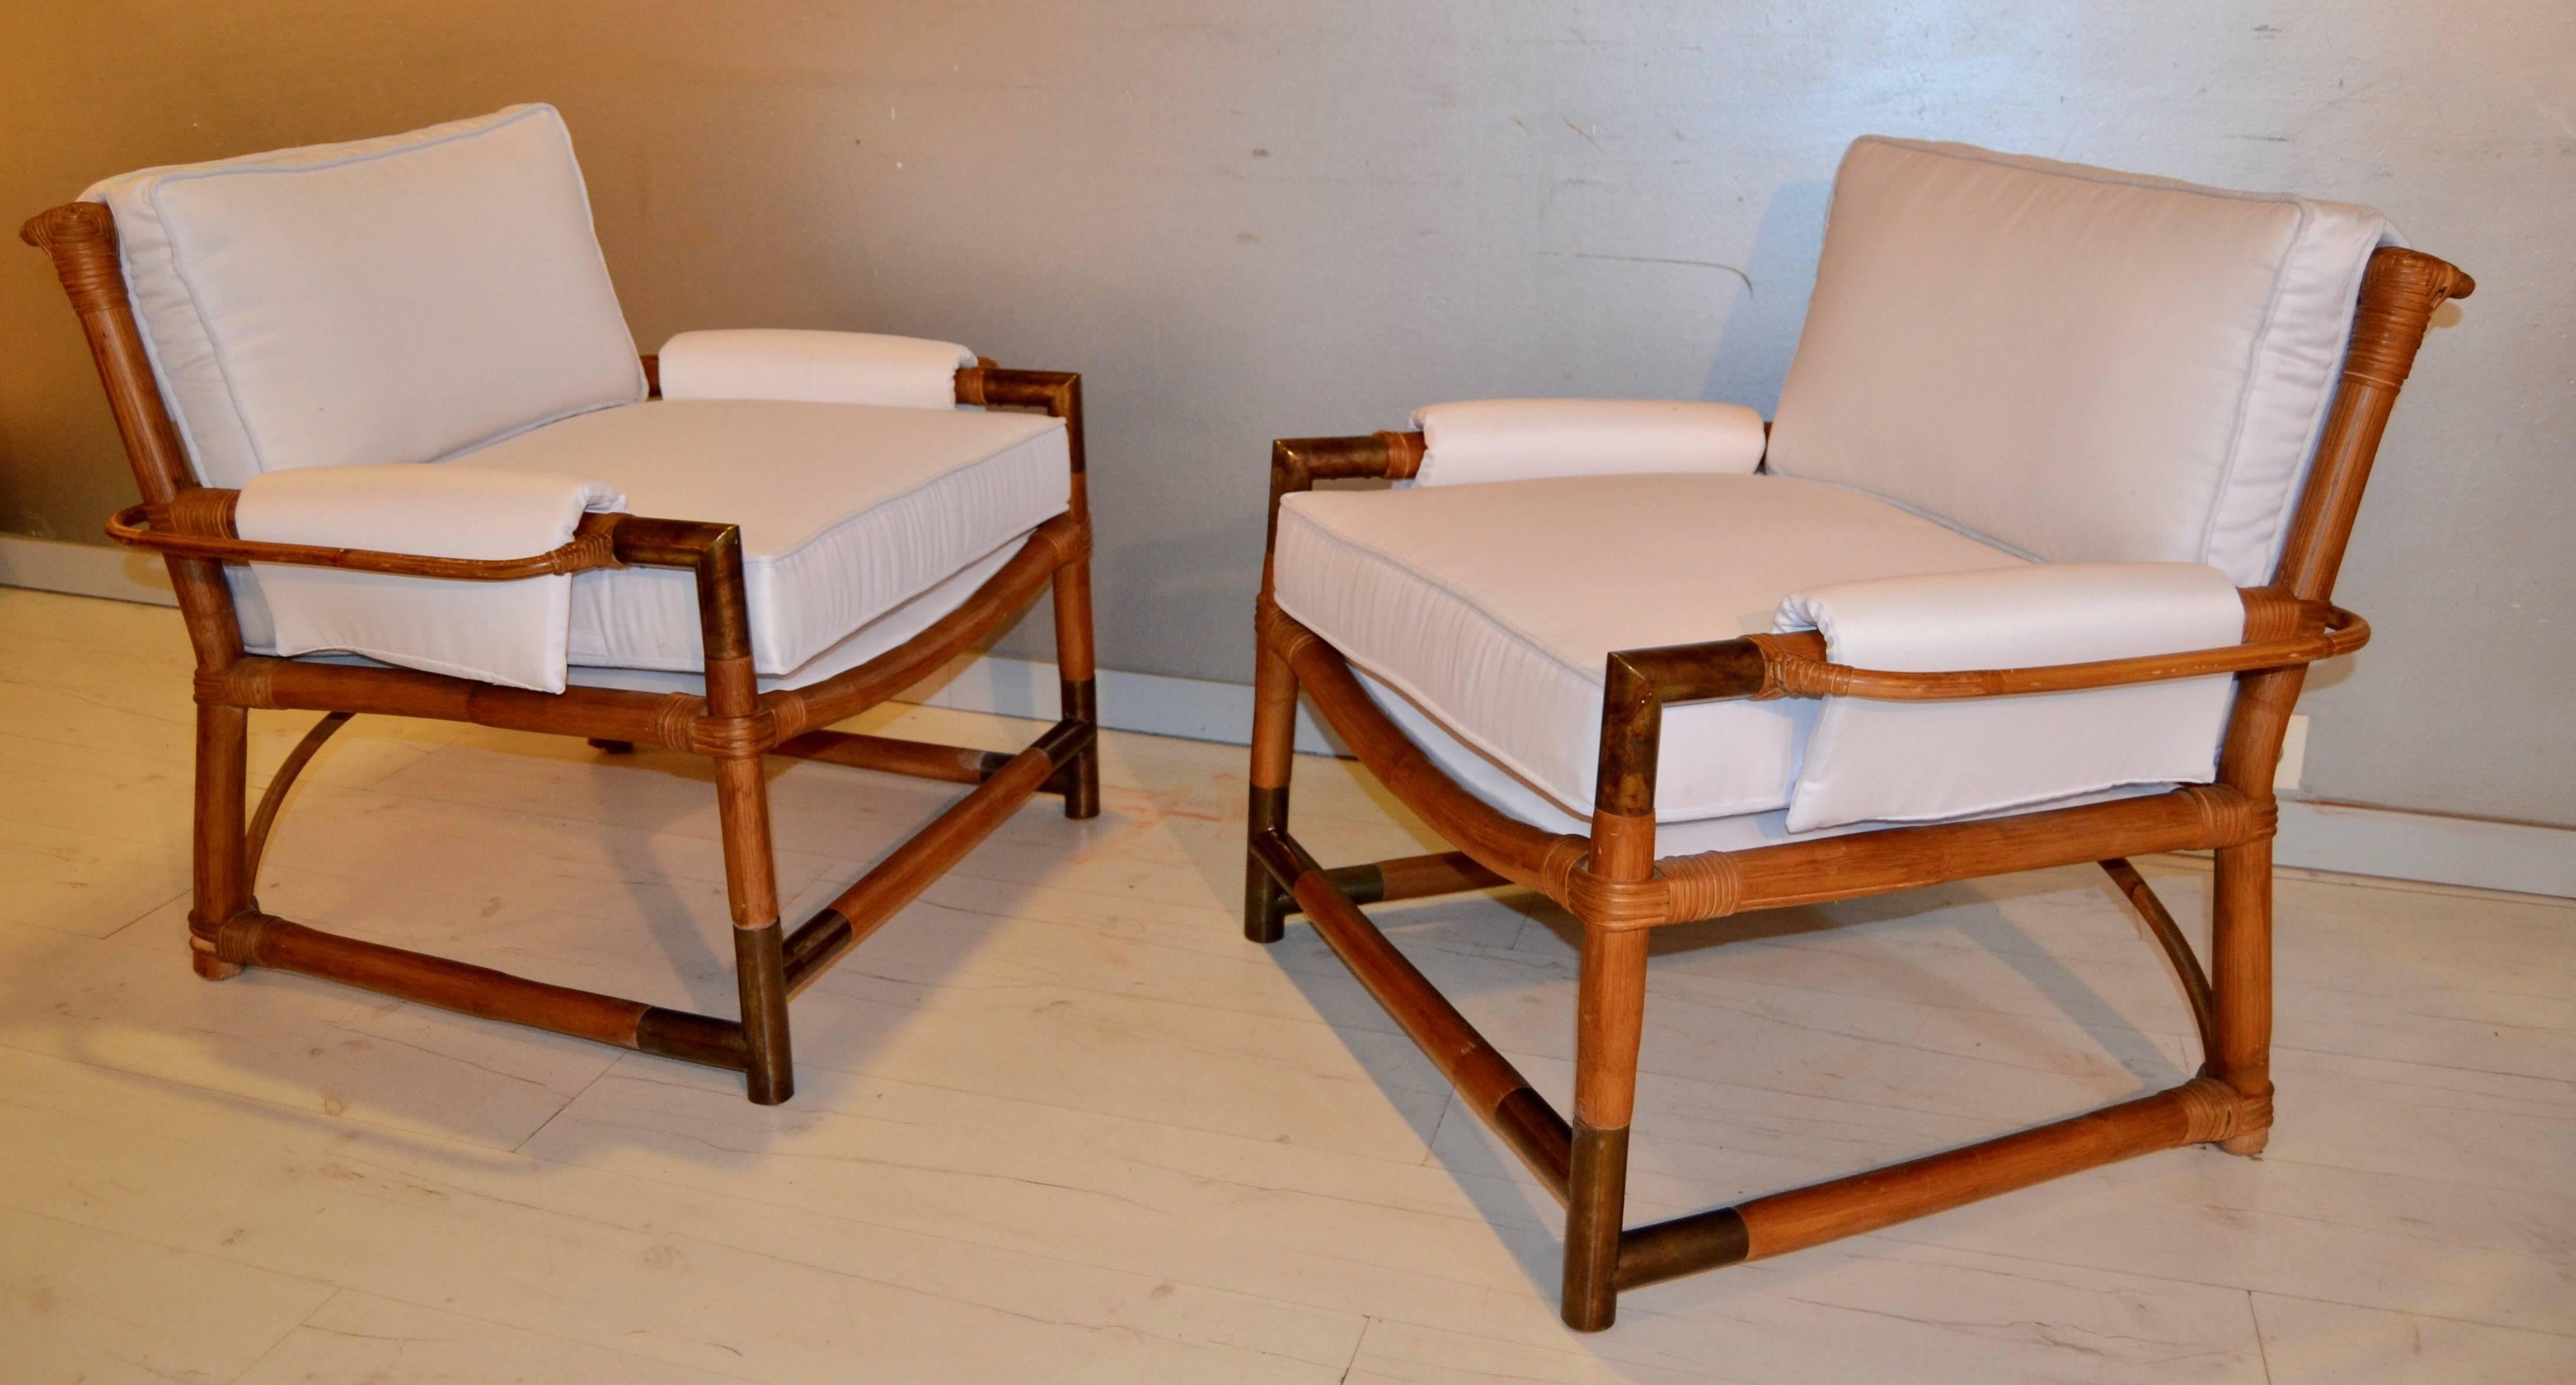 1970s, Italian set of six pieces in bamboo and brass details compose by
Measures: Two armchairs 80 cm x 75 cm x 75 cm
One sofa 140 cm x 75 cm x 75 cm
Two side tables 44 cm x 44 cm x 44 cm
One coffee table 95 cm x 55 cm x 44 cm

New upholstered.